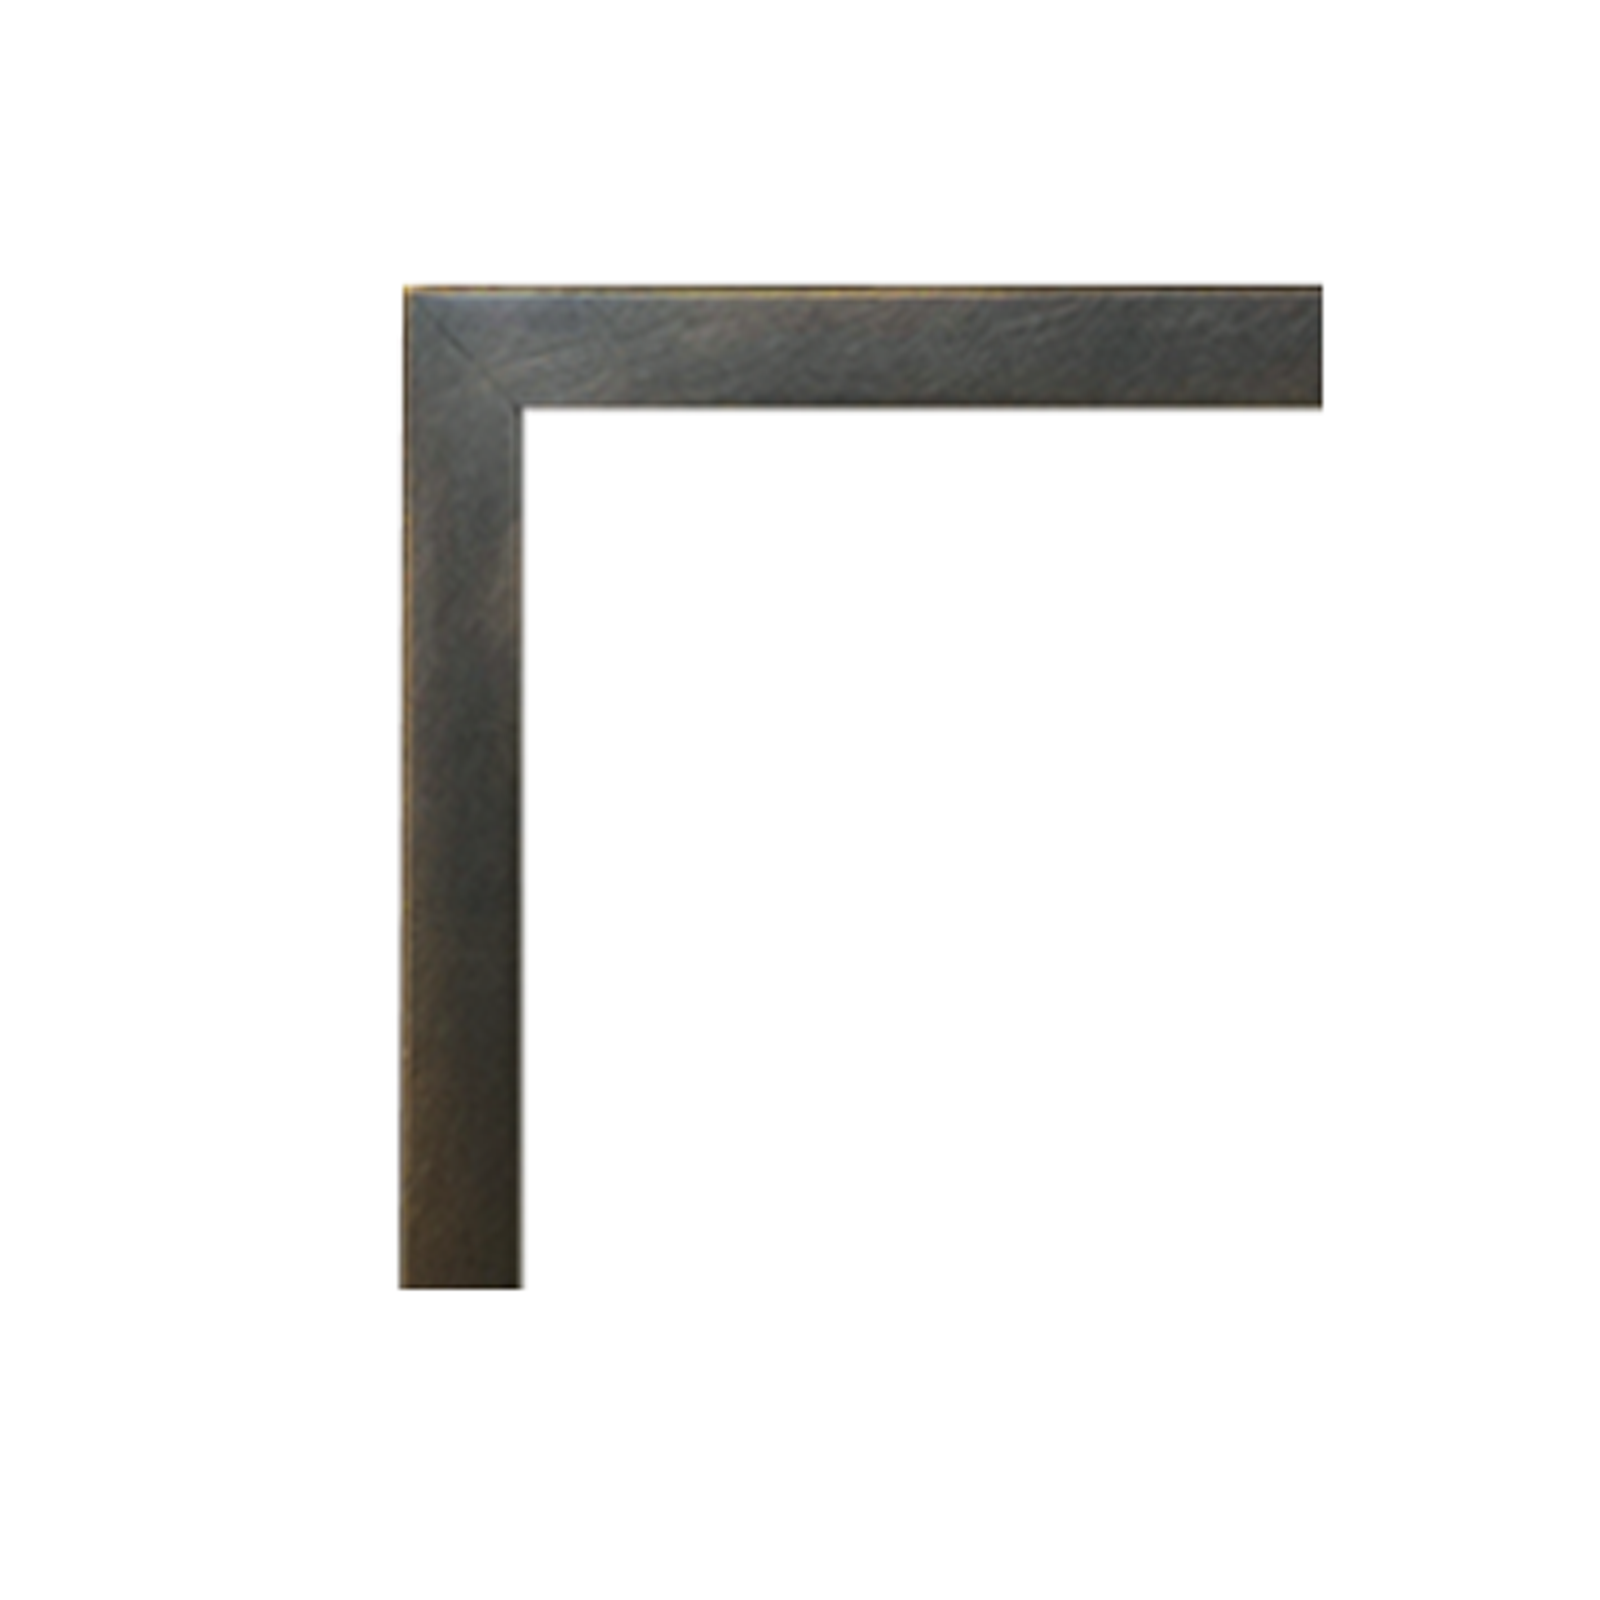 Empire 1.5-in. Oil-Rubbed Bronze Beveled Frame - DF602LBZT